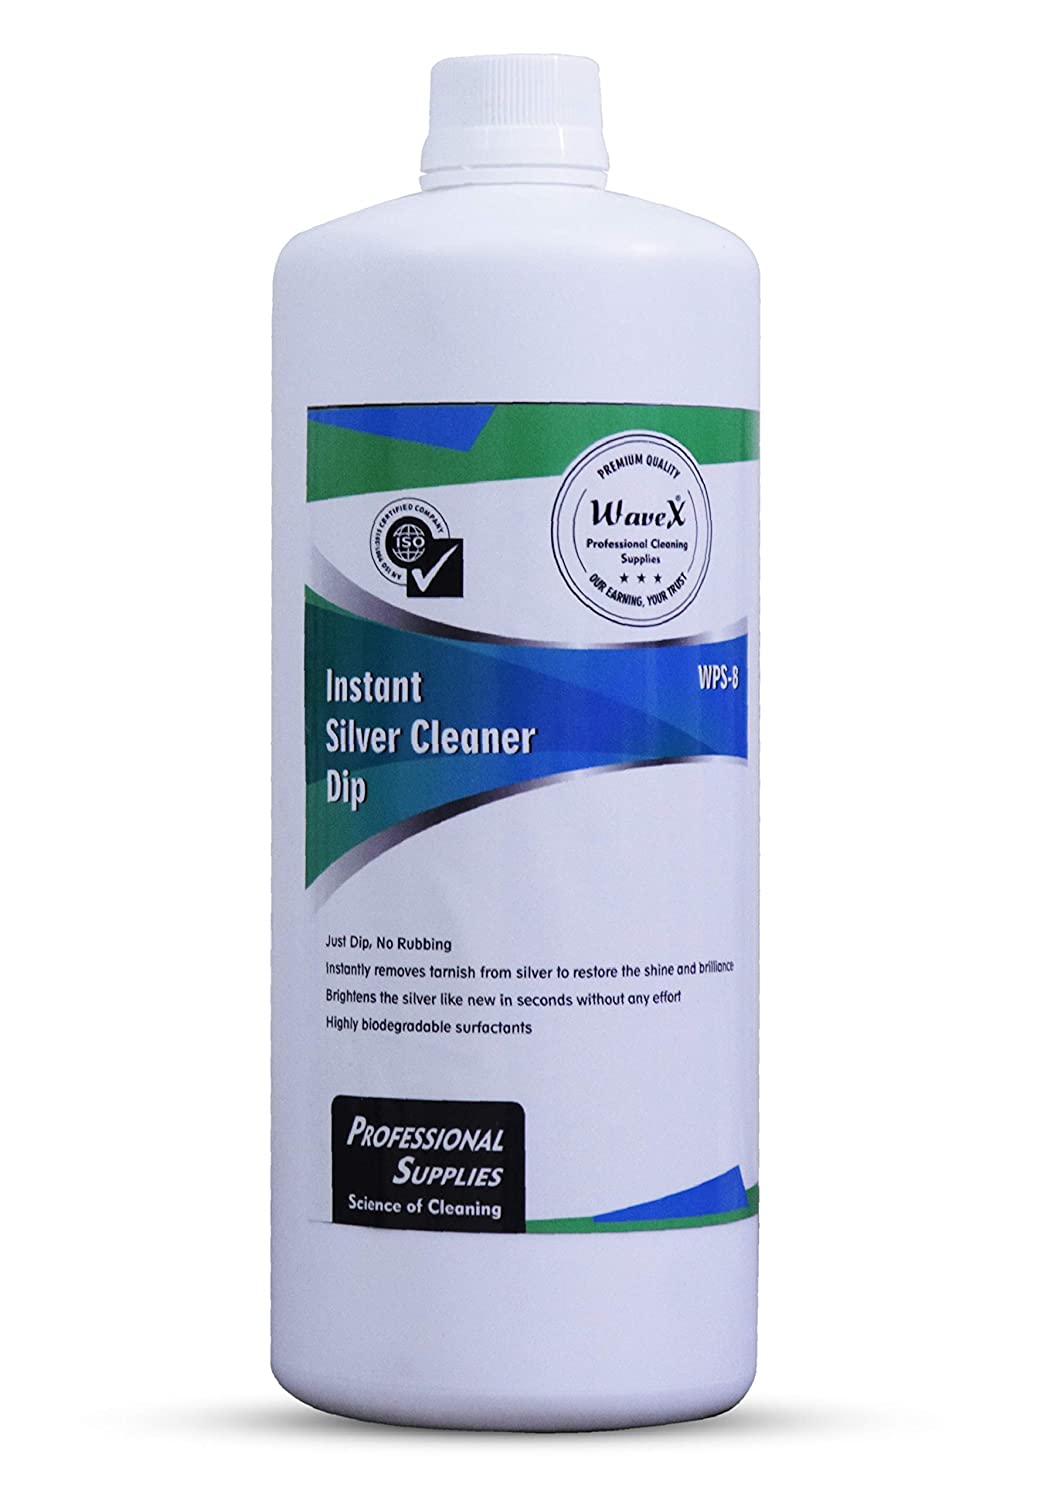  Silver Cleaner Dip